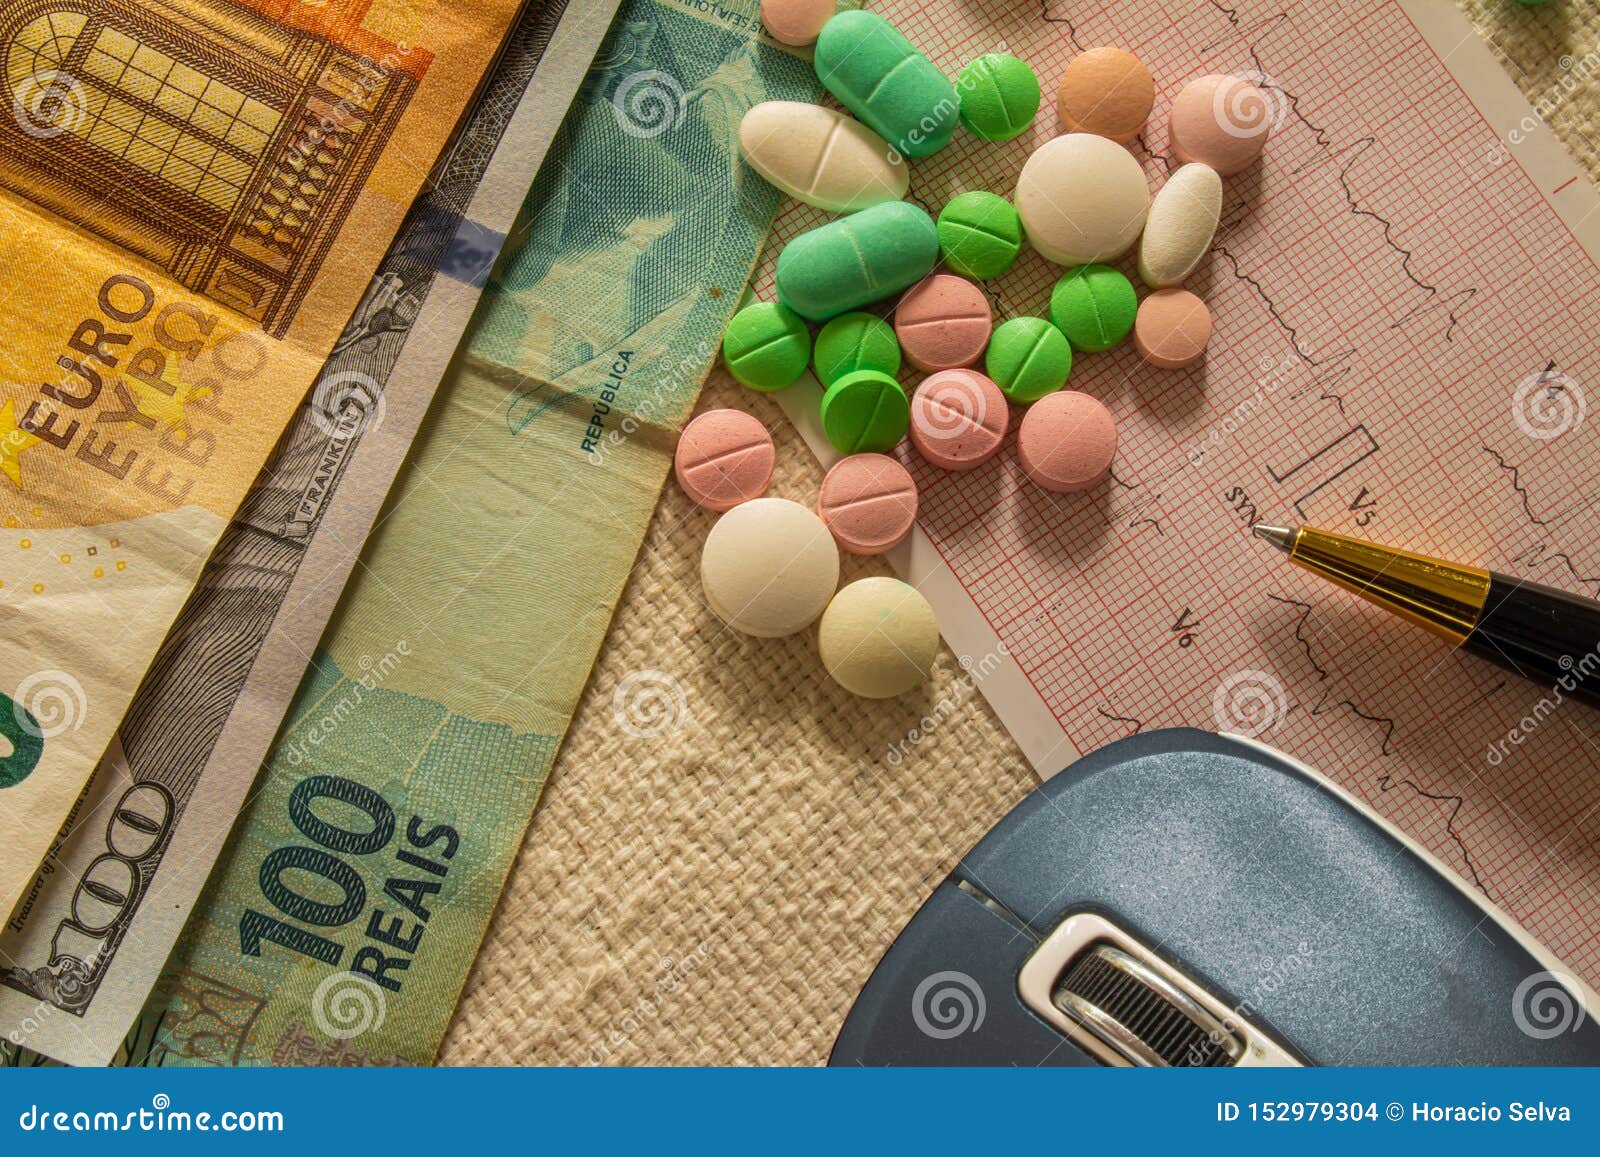 Desk With Bills And Medicines Concept Of Cost Of Health And Drug